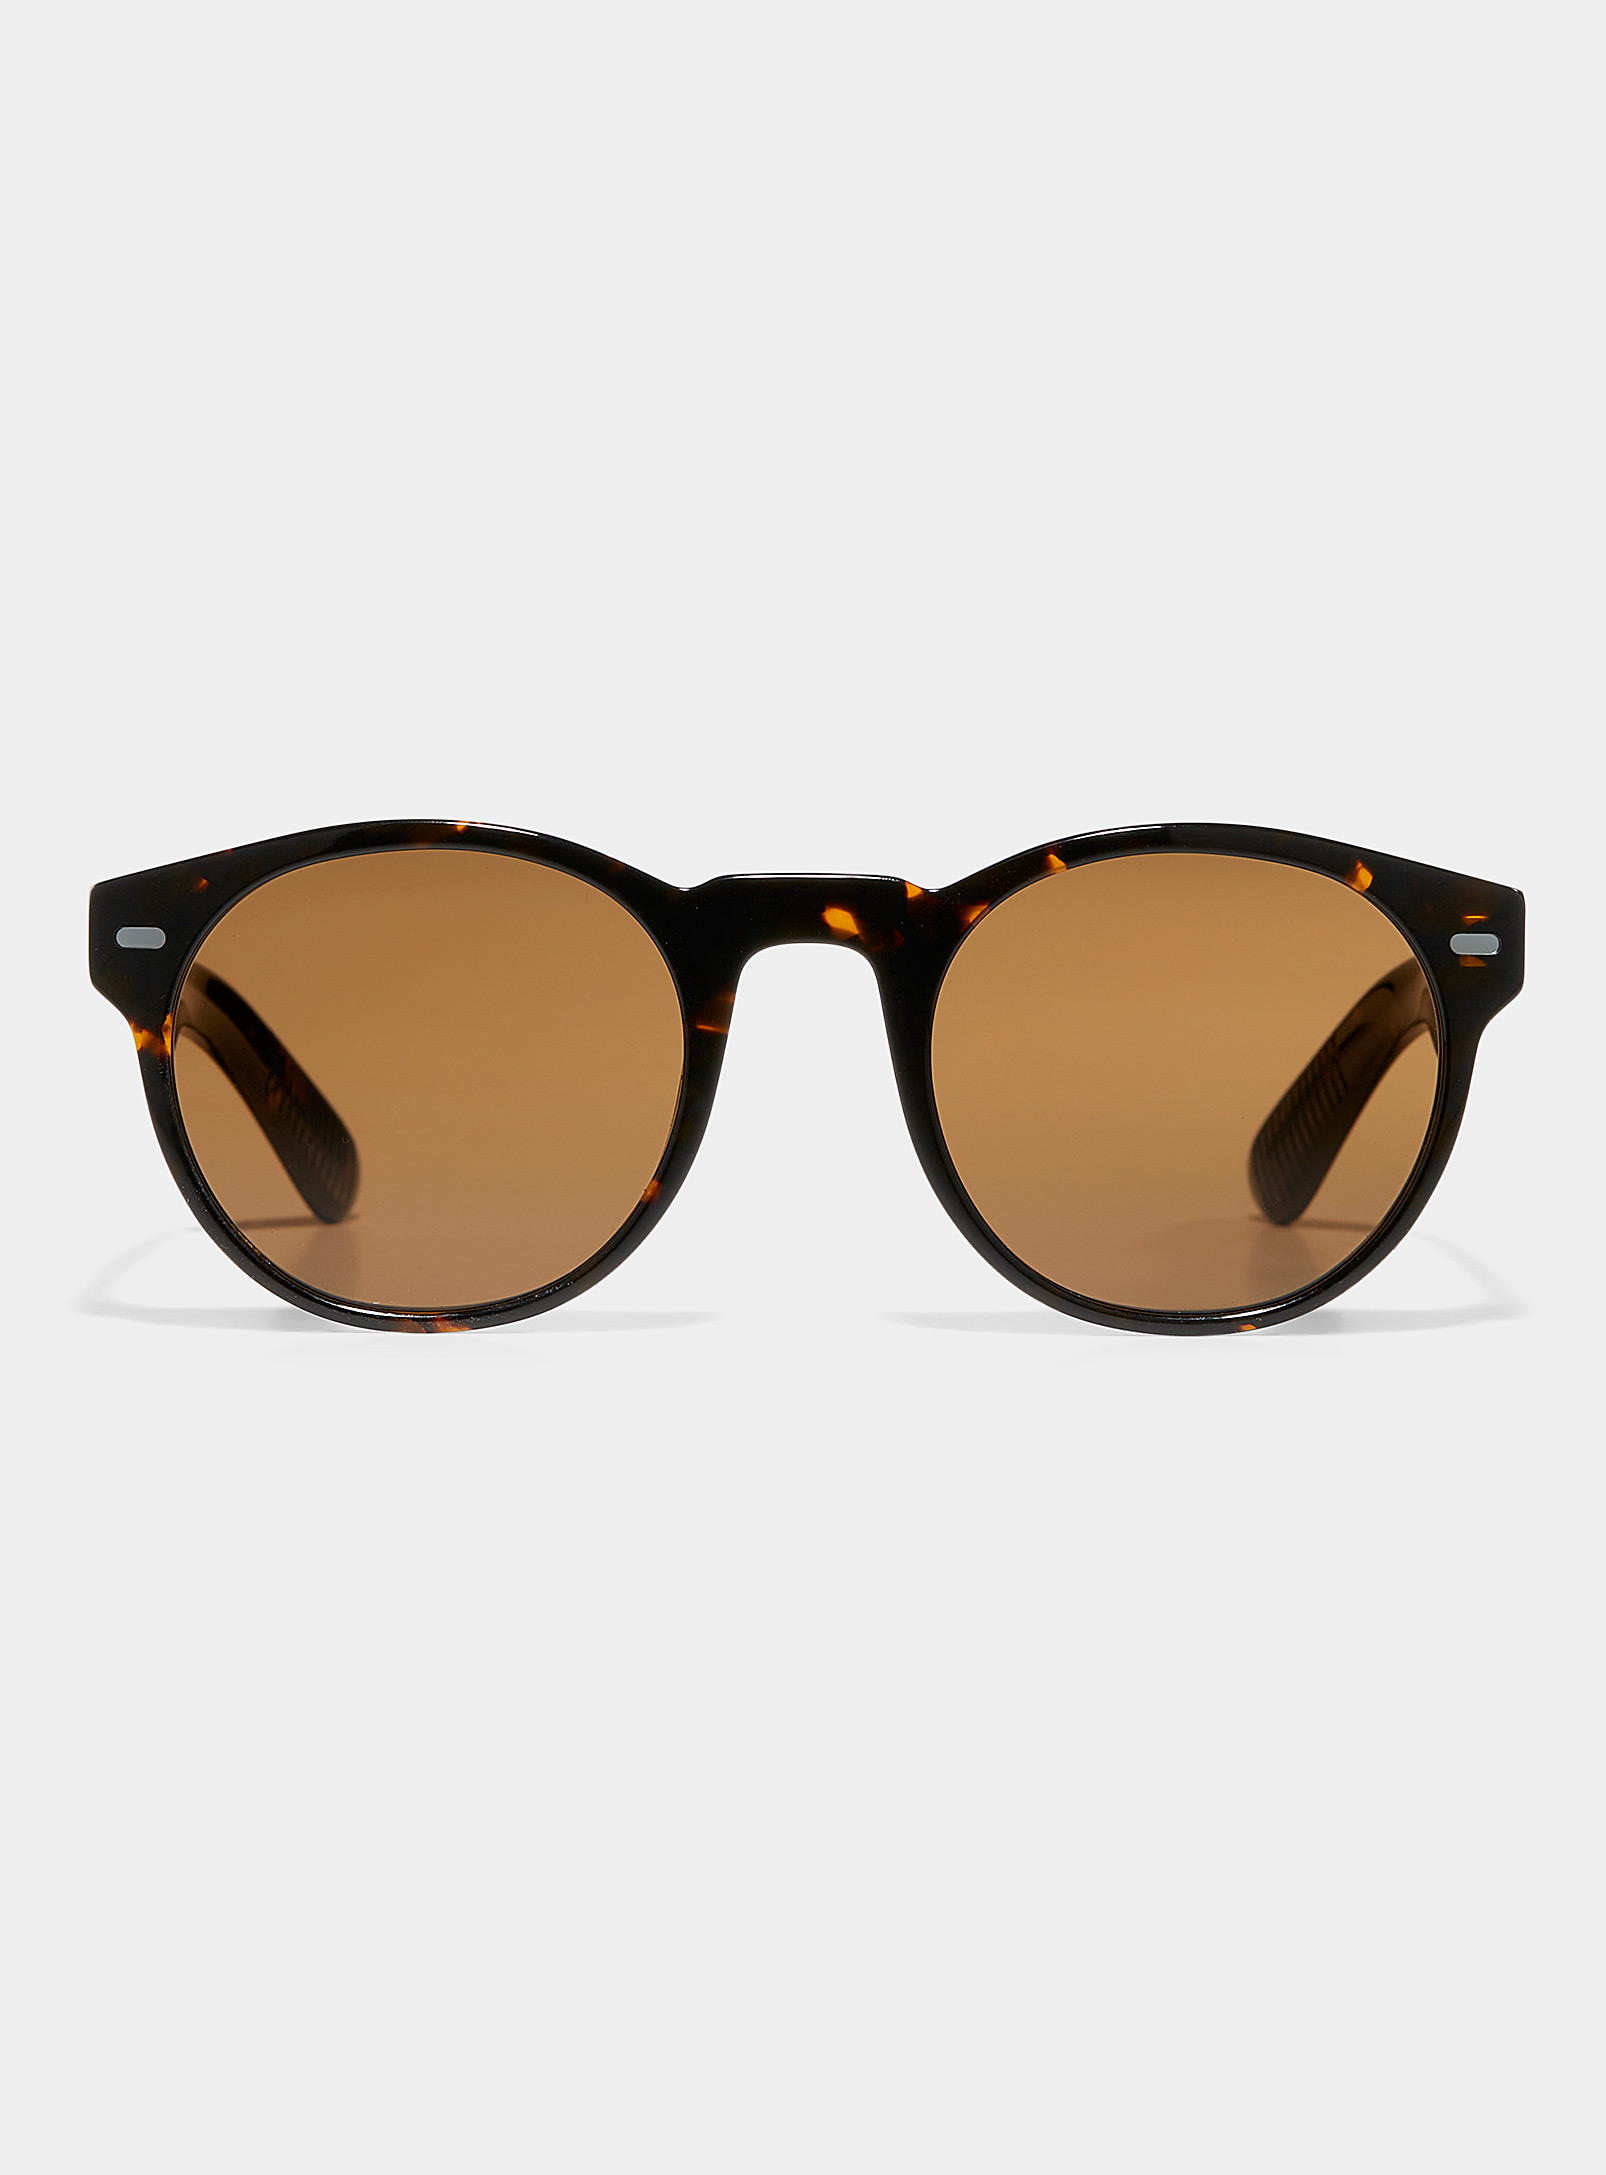 Spitfire Cut Ninety Five Round Sunglasses In Brown